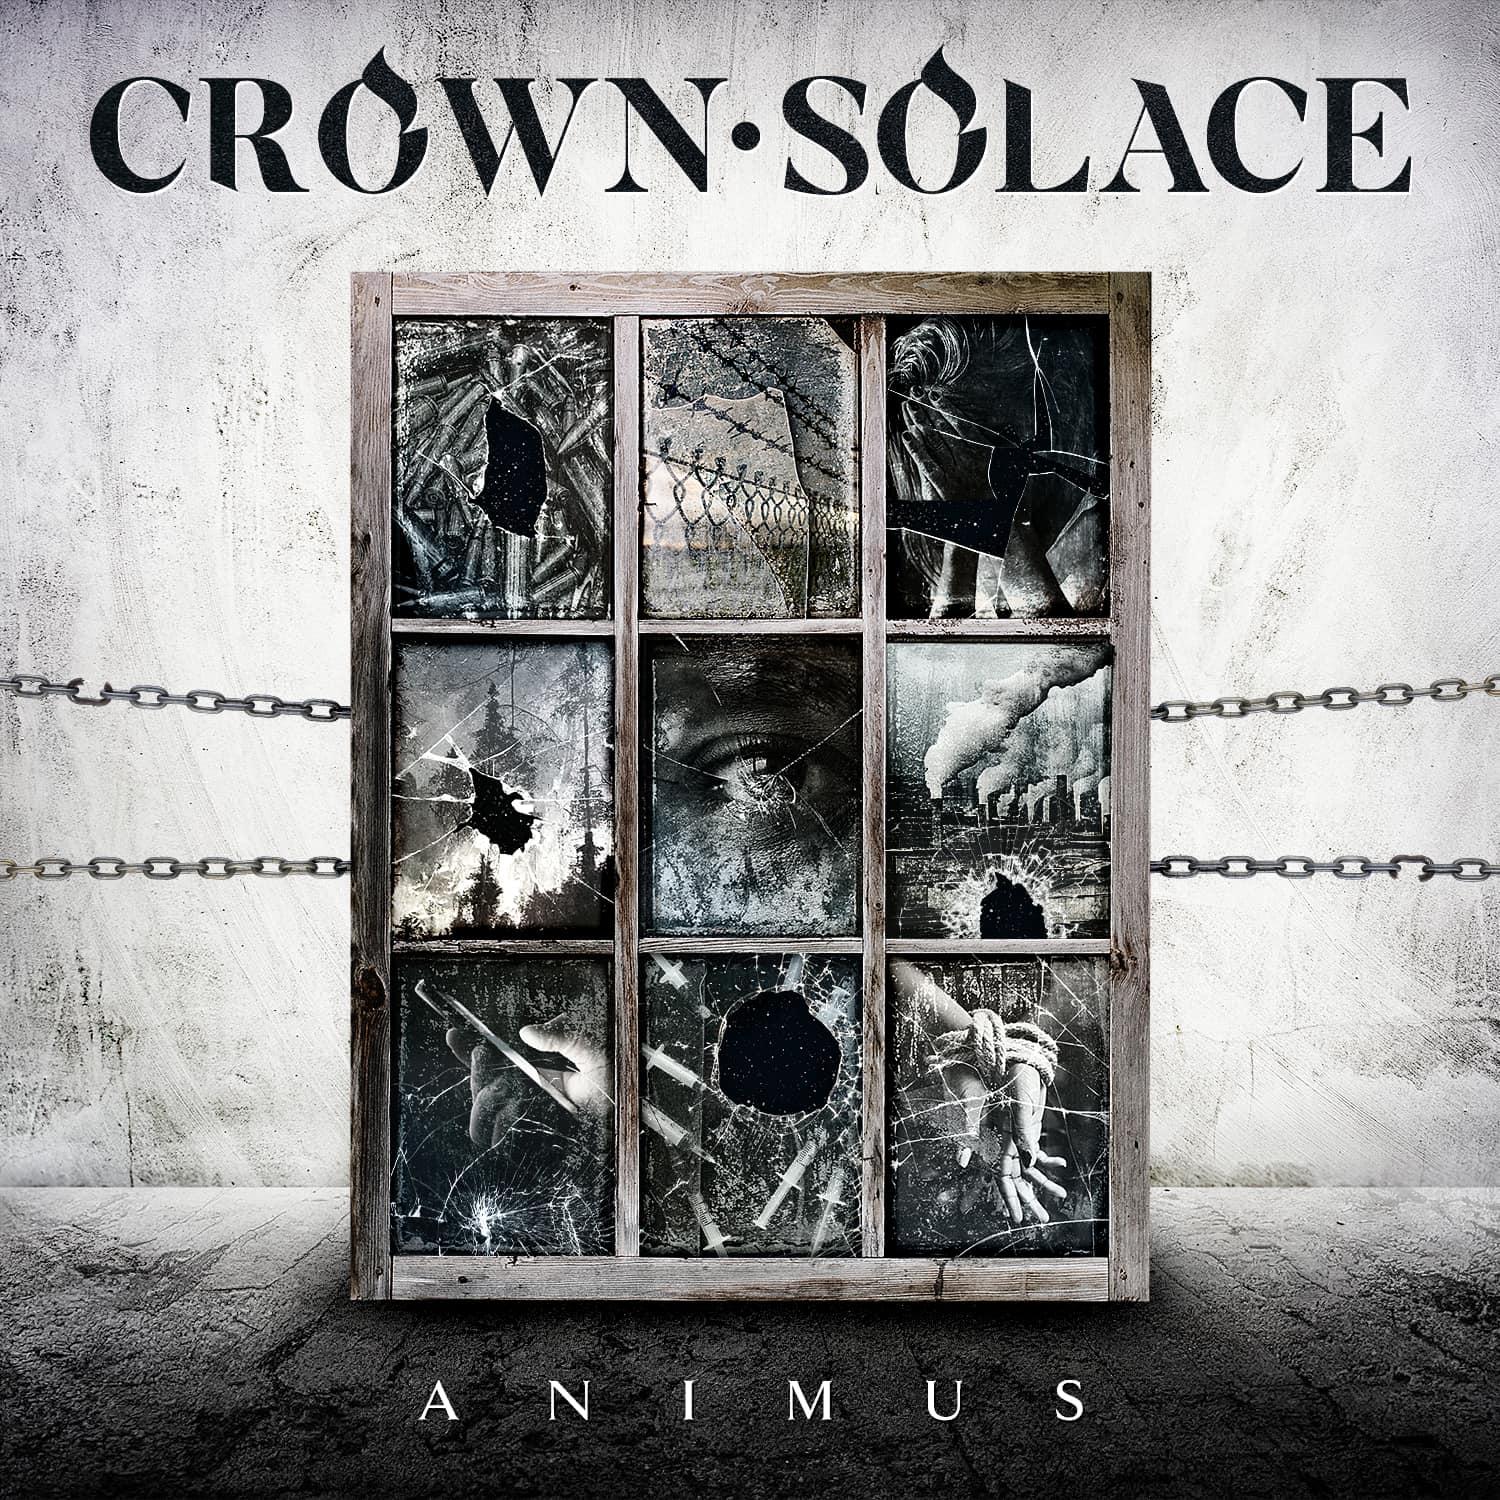 Crown solace